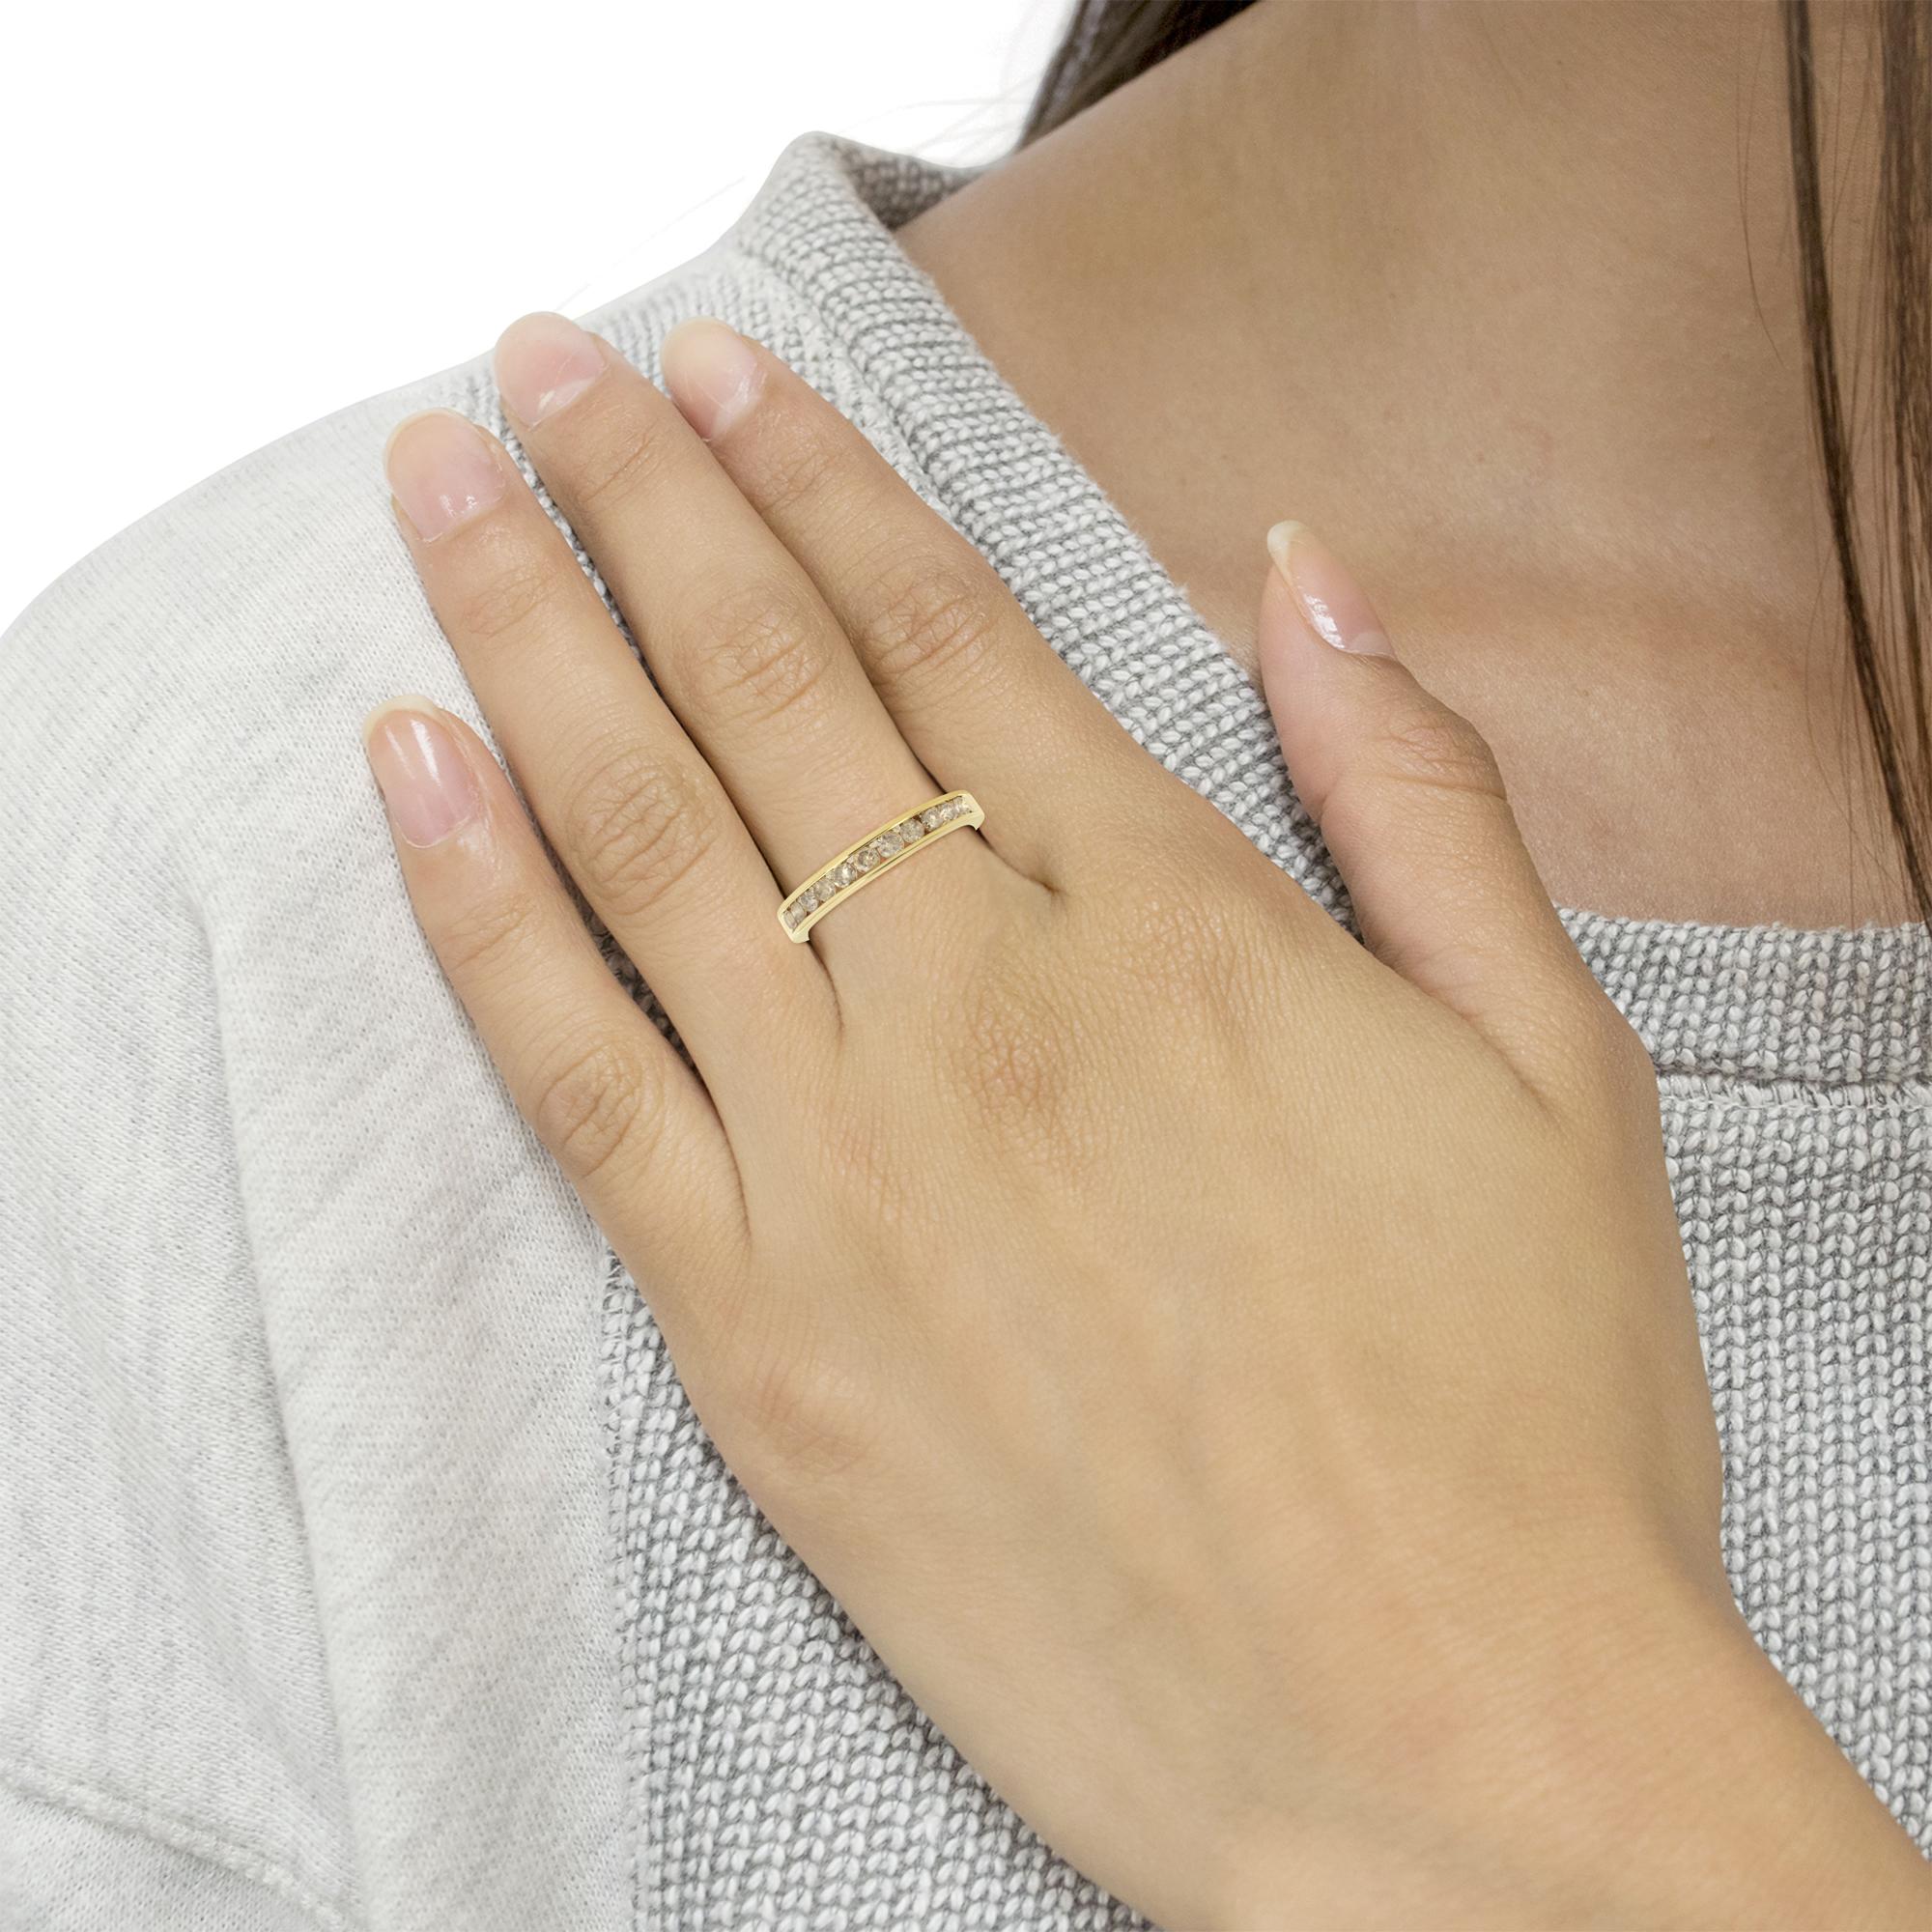 Celebrate Everlasting Love with Our Glittering 14K Yellow Gold Plated Diamond Band Ring!